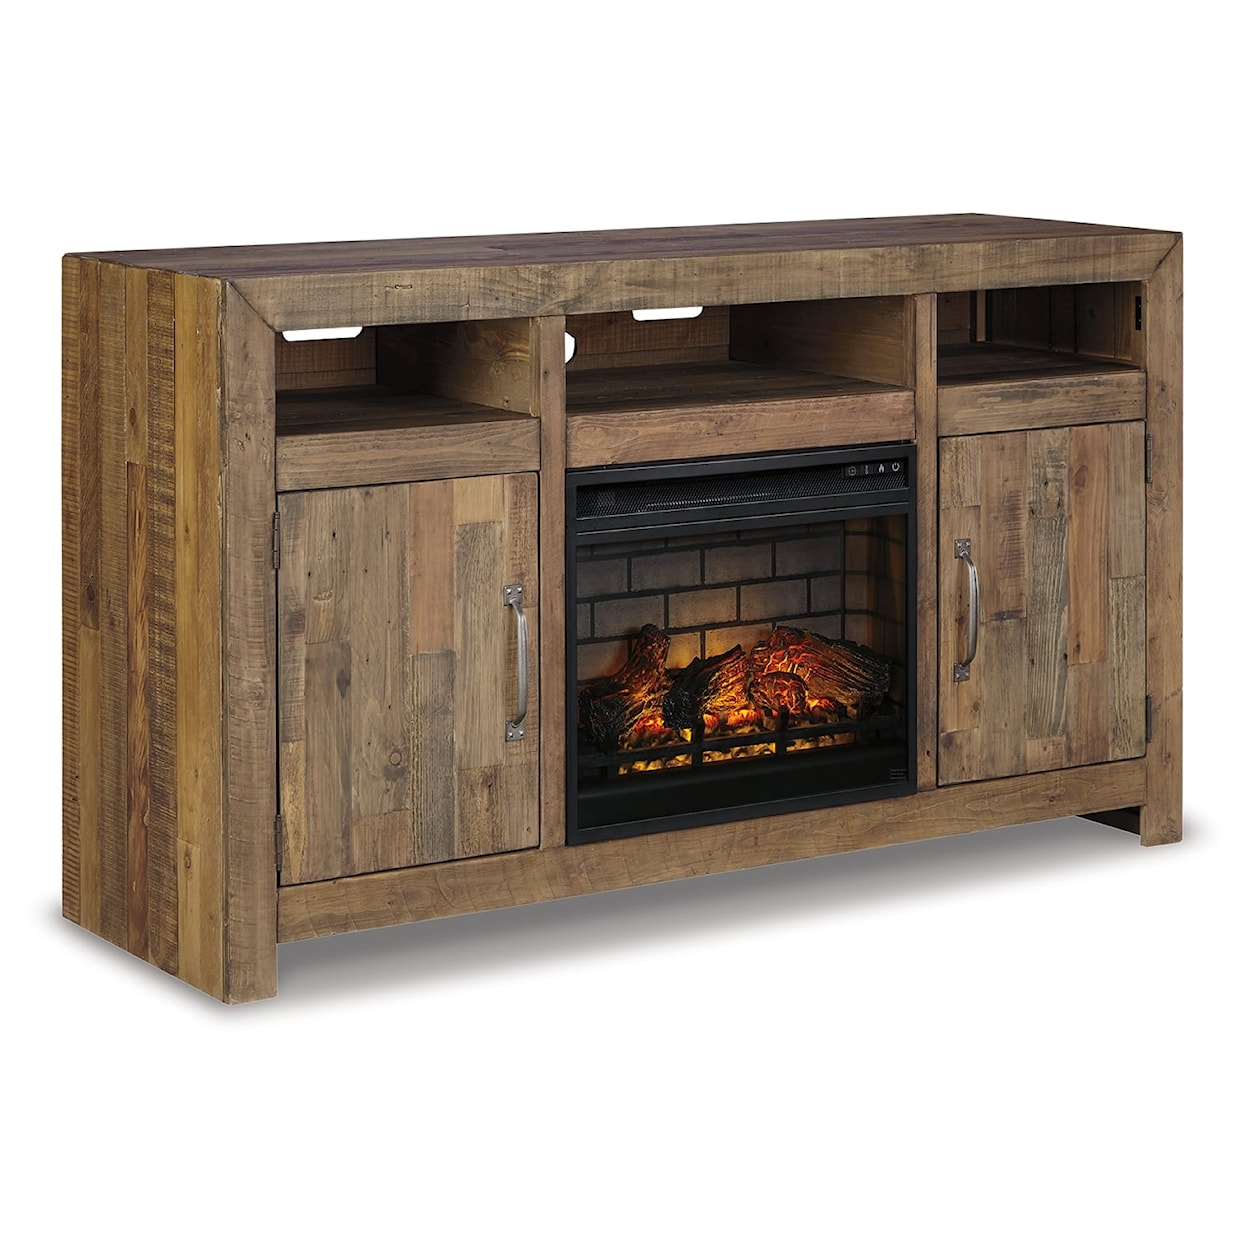 Ashley Furniture Signature Design Sommerford 62" TV Stand with Electric Fireplace